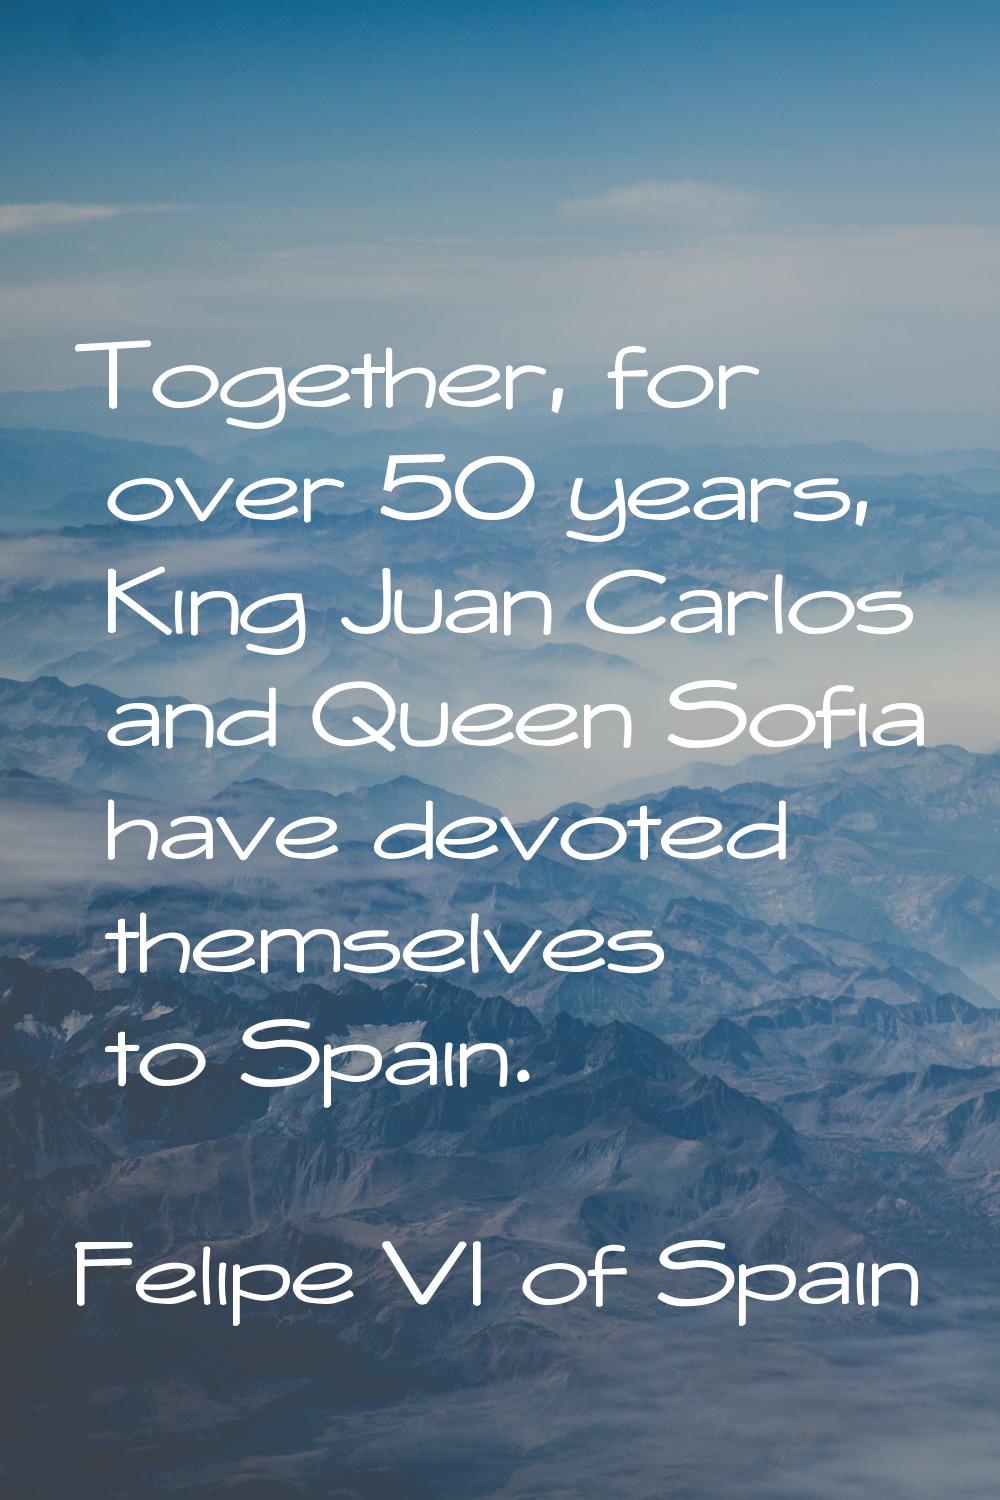 Together, for over 50 years, King Juan Carlos and Queen Sofia have devoted themselves to Spain.